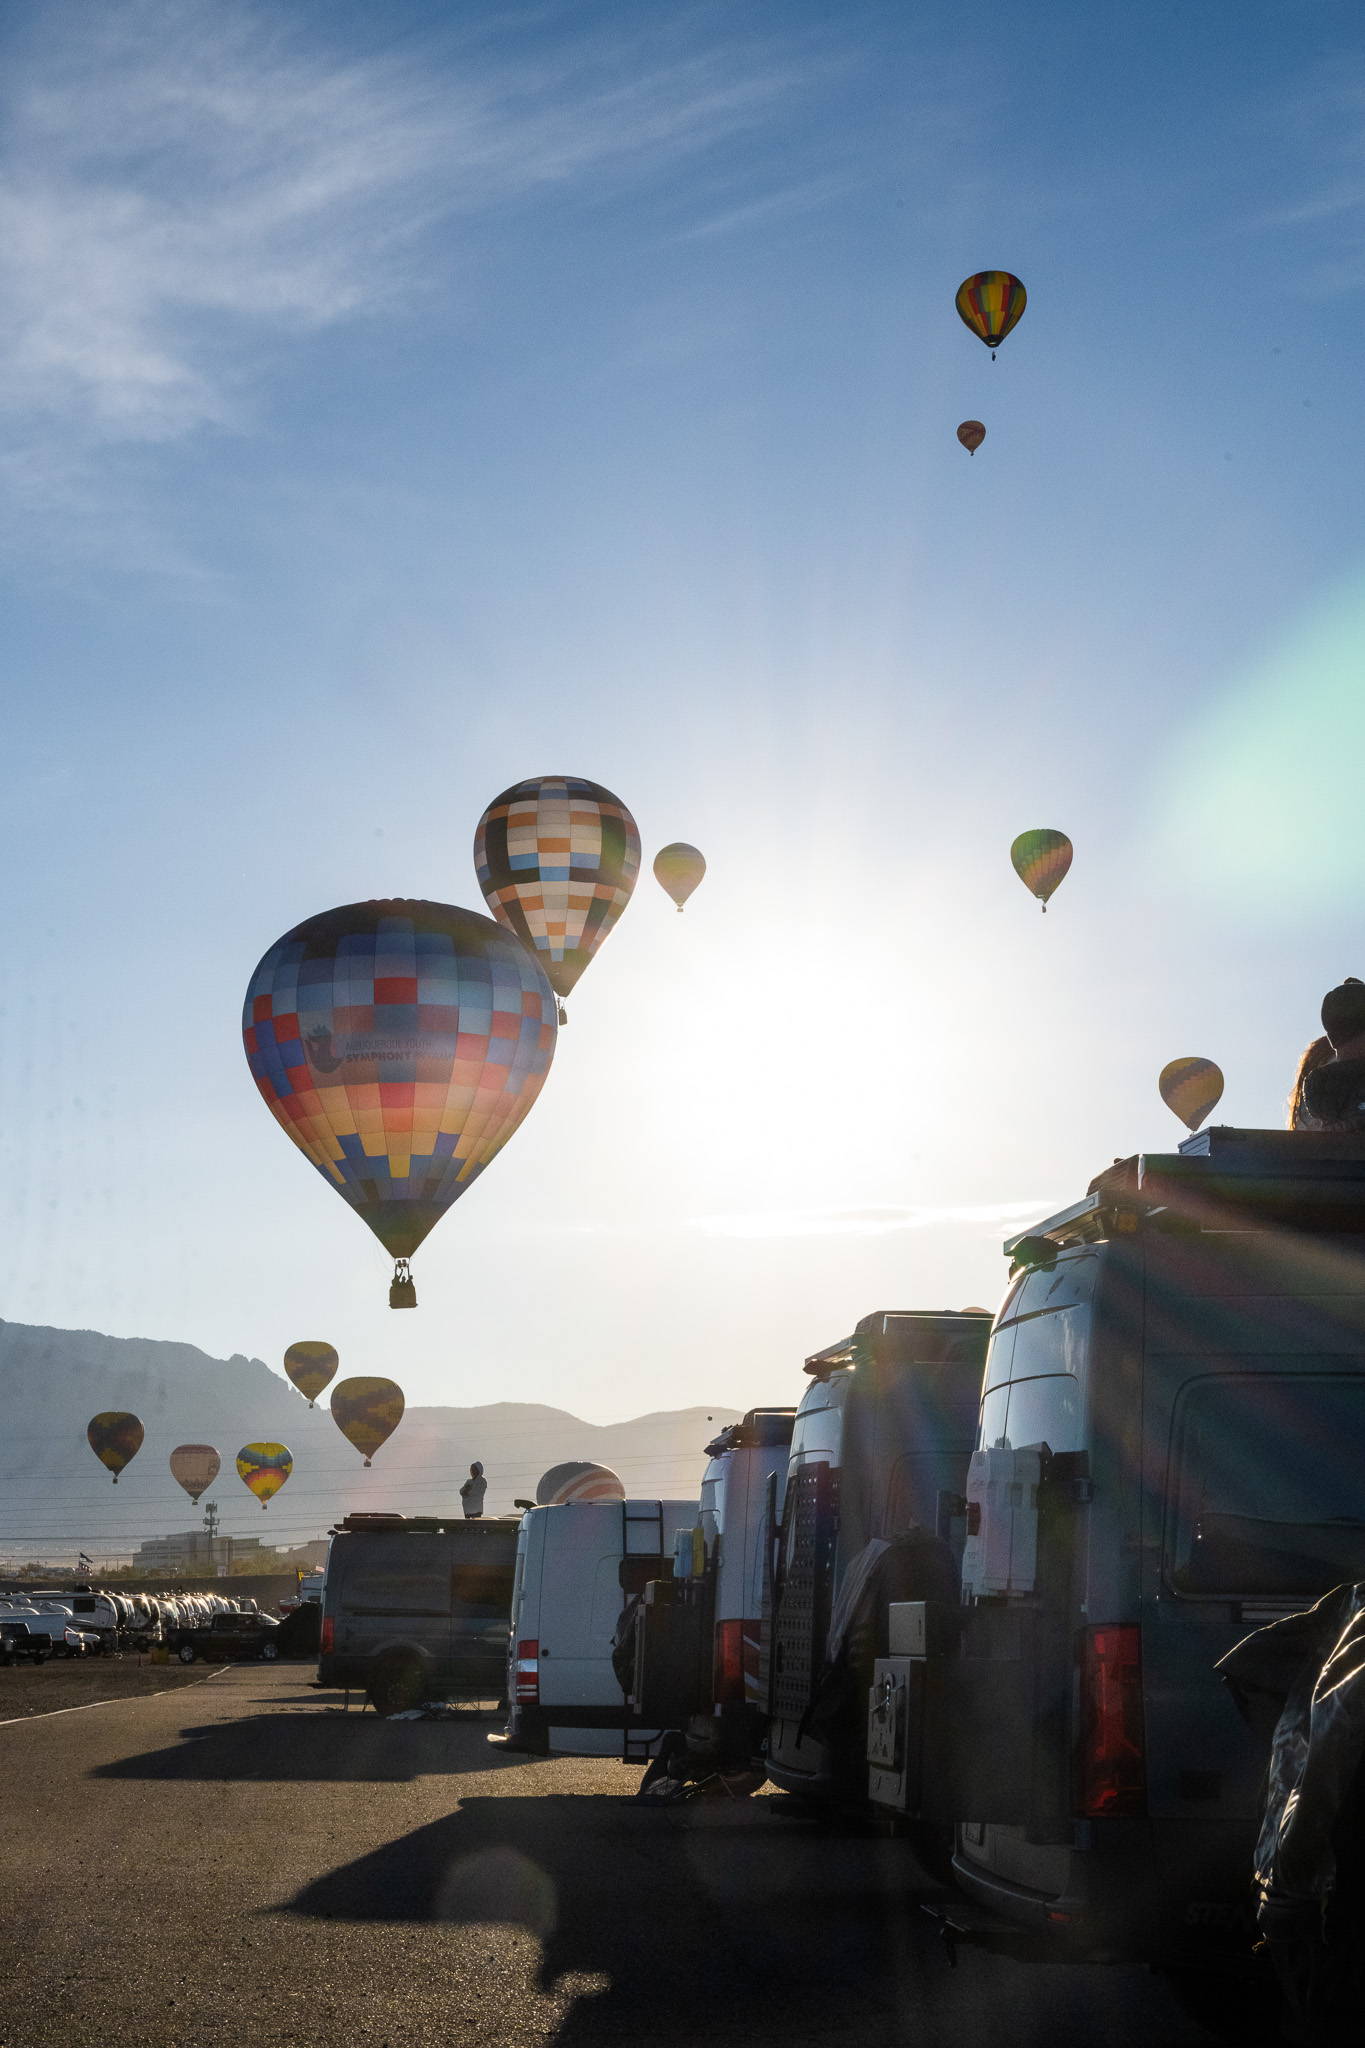 Storyteller Overland owners at the Albuquerque Balloon Fiesta